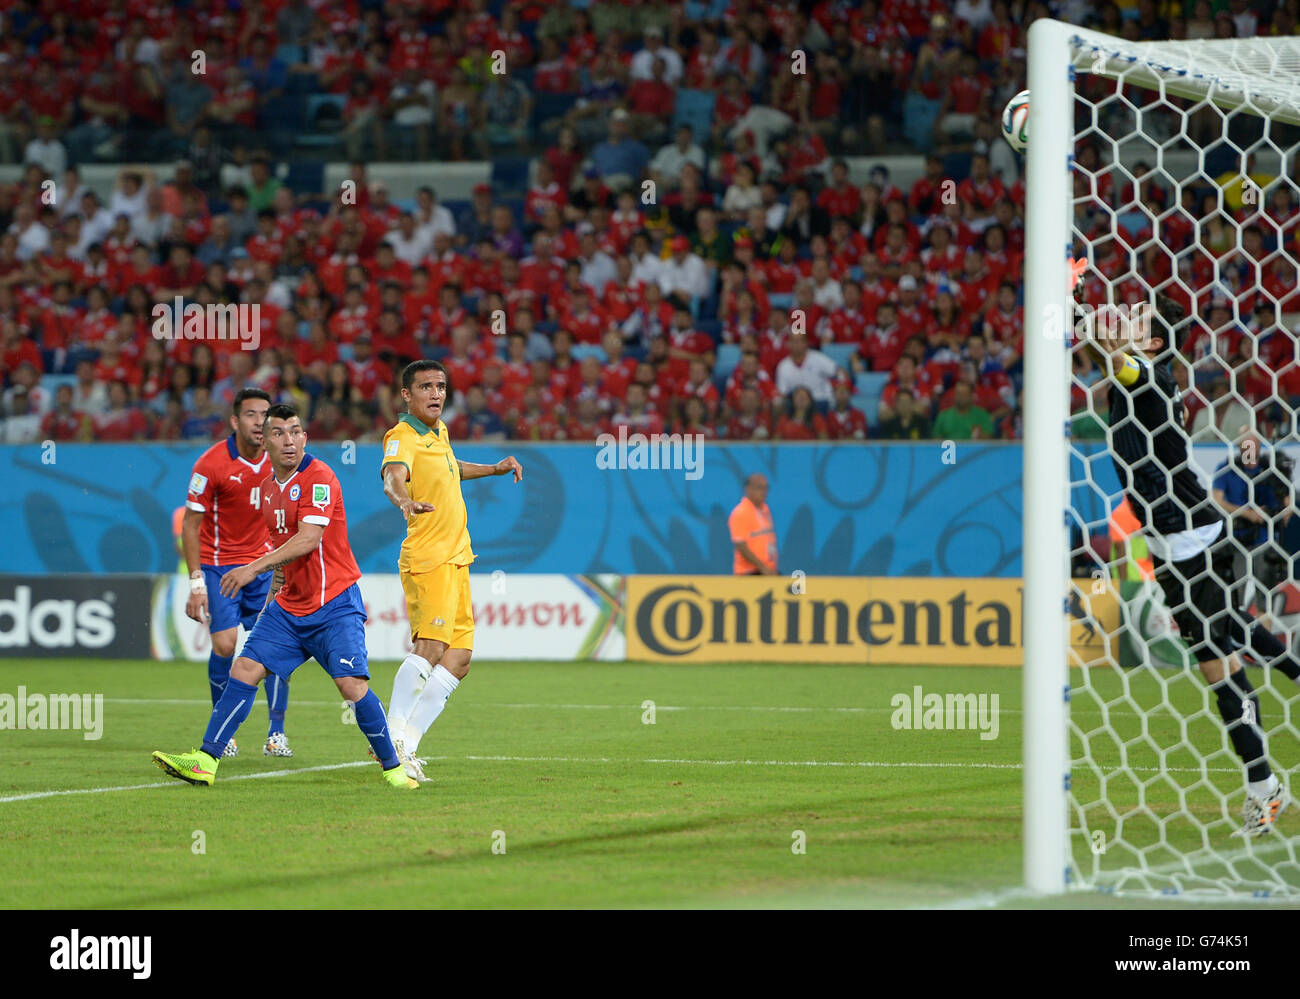 Soccer - FIFA World Cup 2014 - Group B - Chile v Australia - Arena Pantanal. Australia's Tim Cahill (right) scores his side's first goal of the game Stock Photo